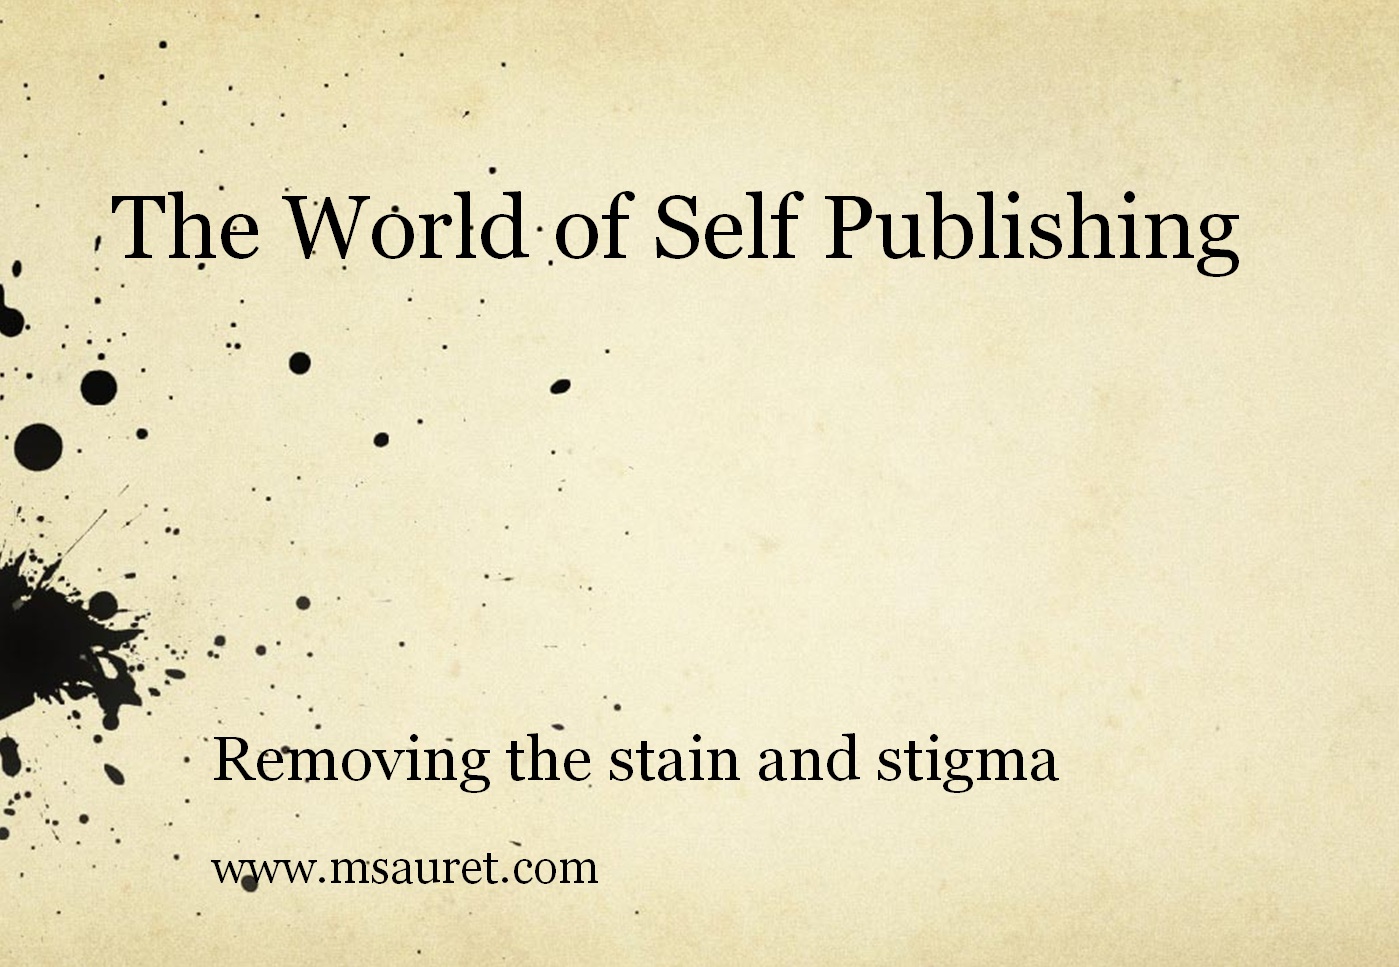 Workshop: Self Publishing – Removing the Stain and Stigma